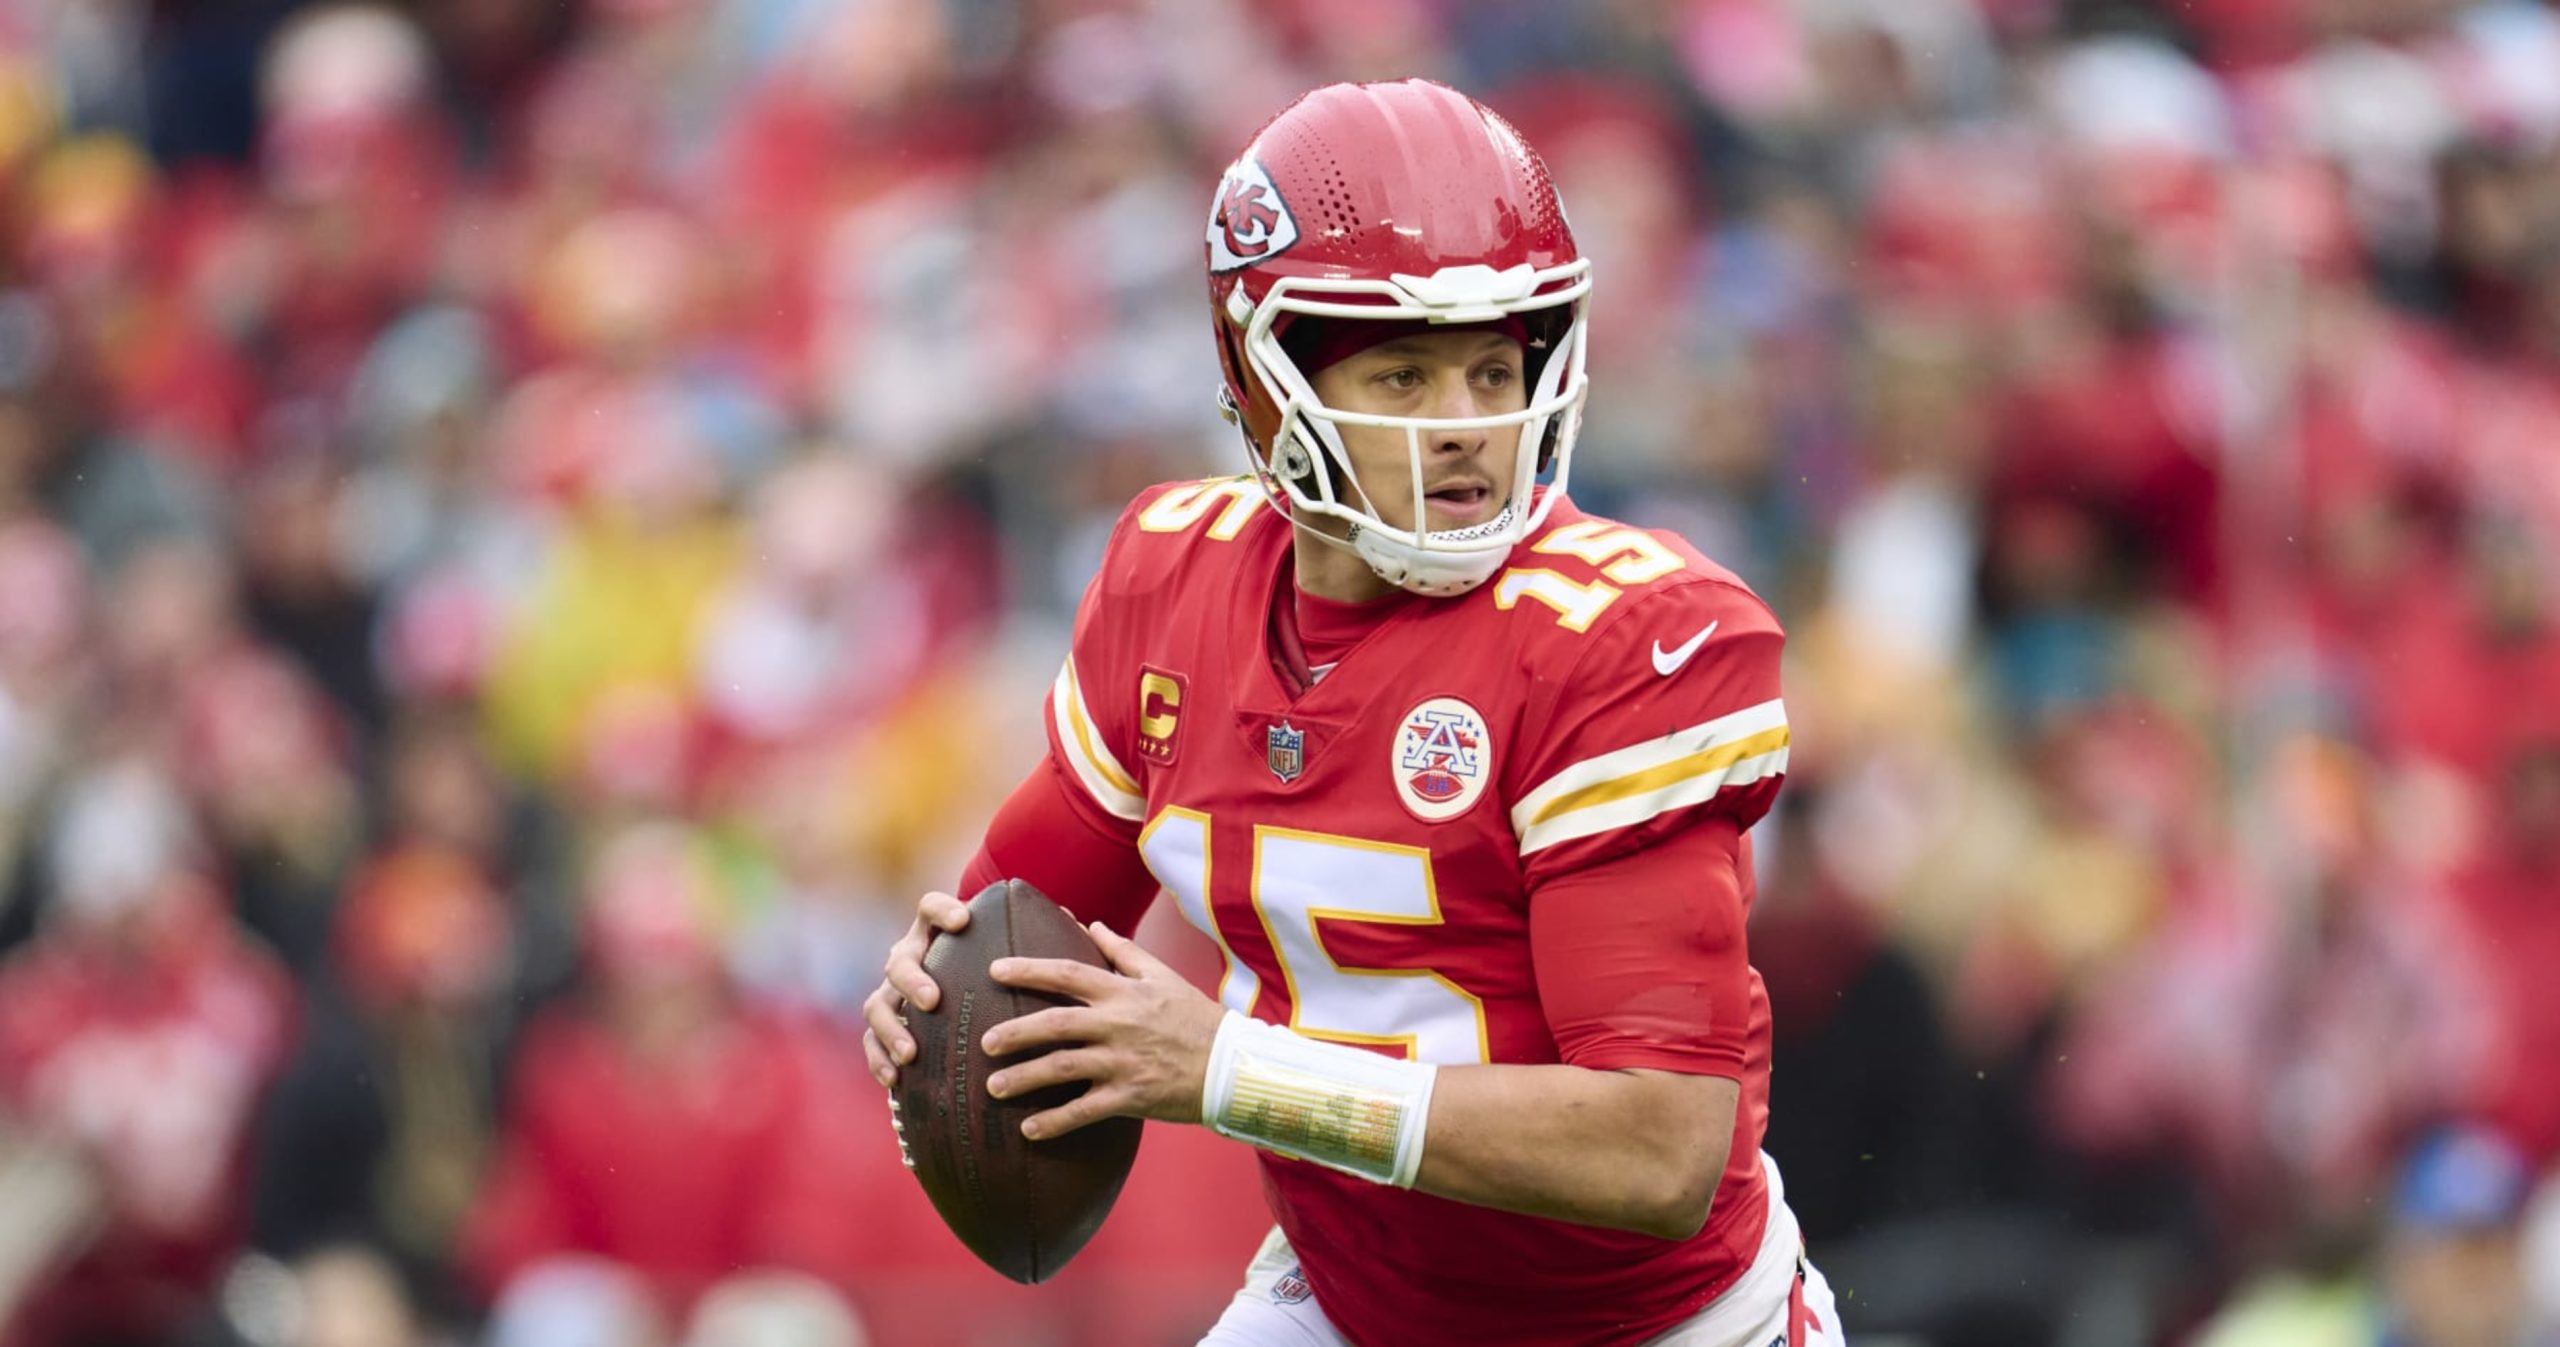 Patrick Mahomes is ready to play despite ankle injury